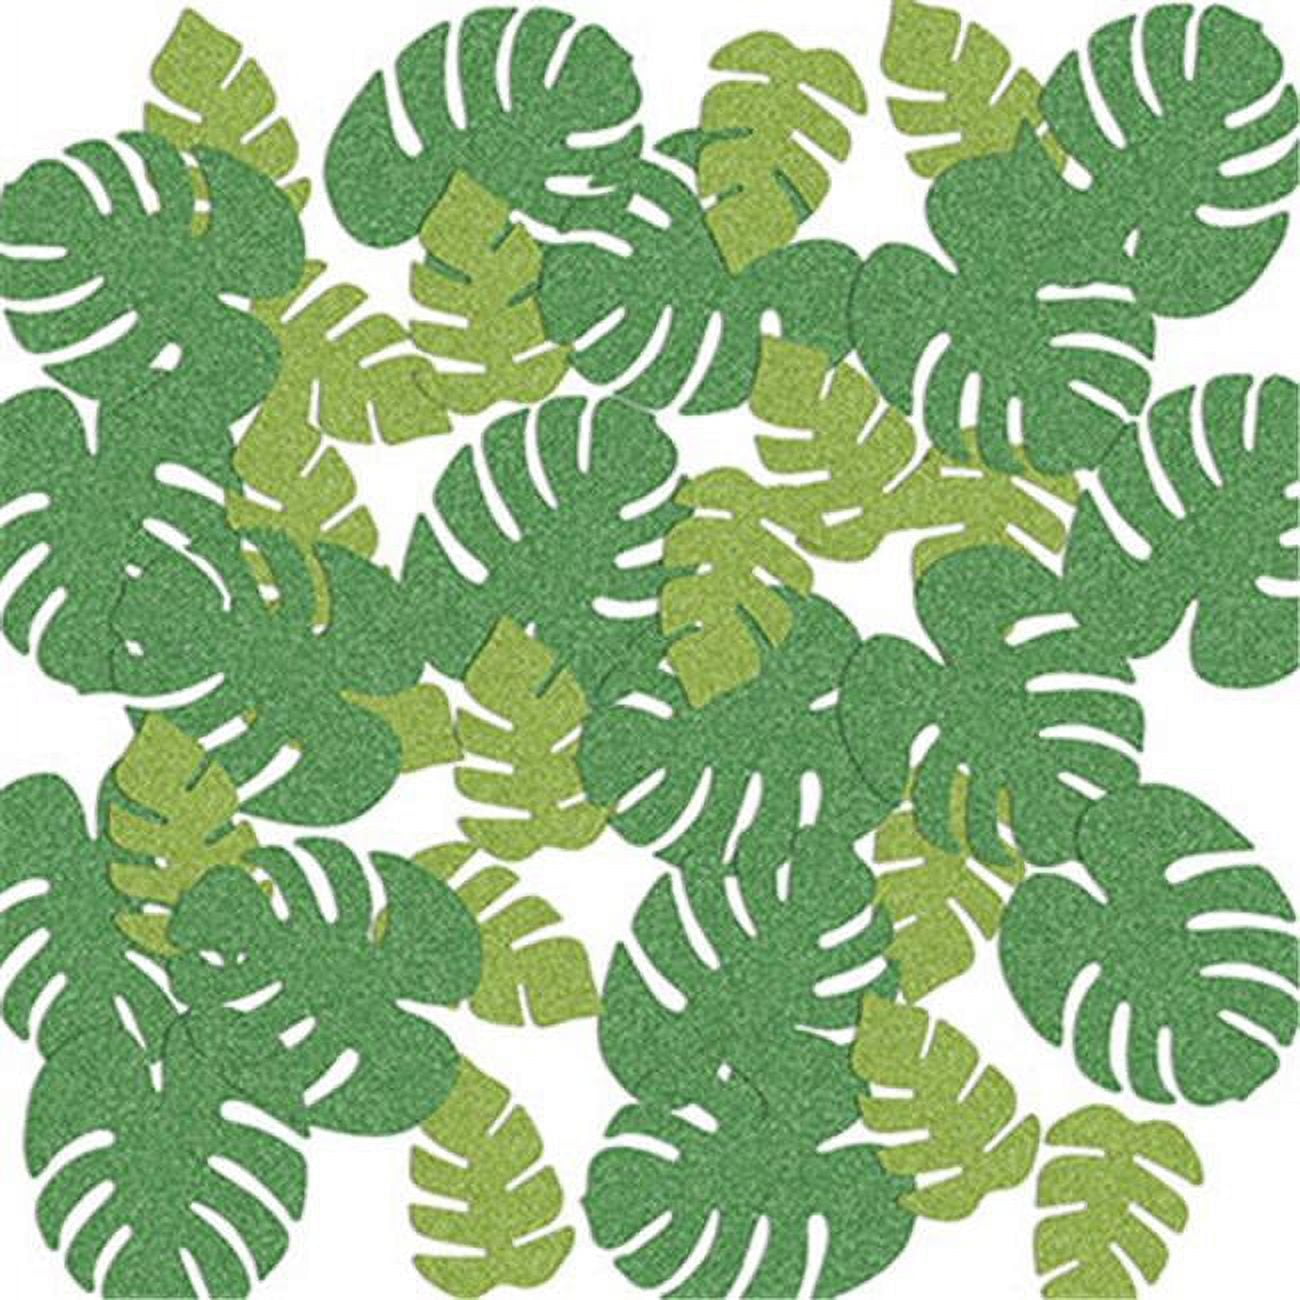 Picture of Beistle 53781 Tropical Palm Leaf Del Sparkle Confetti, Green - Pack of 12